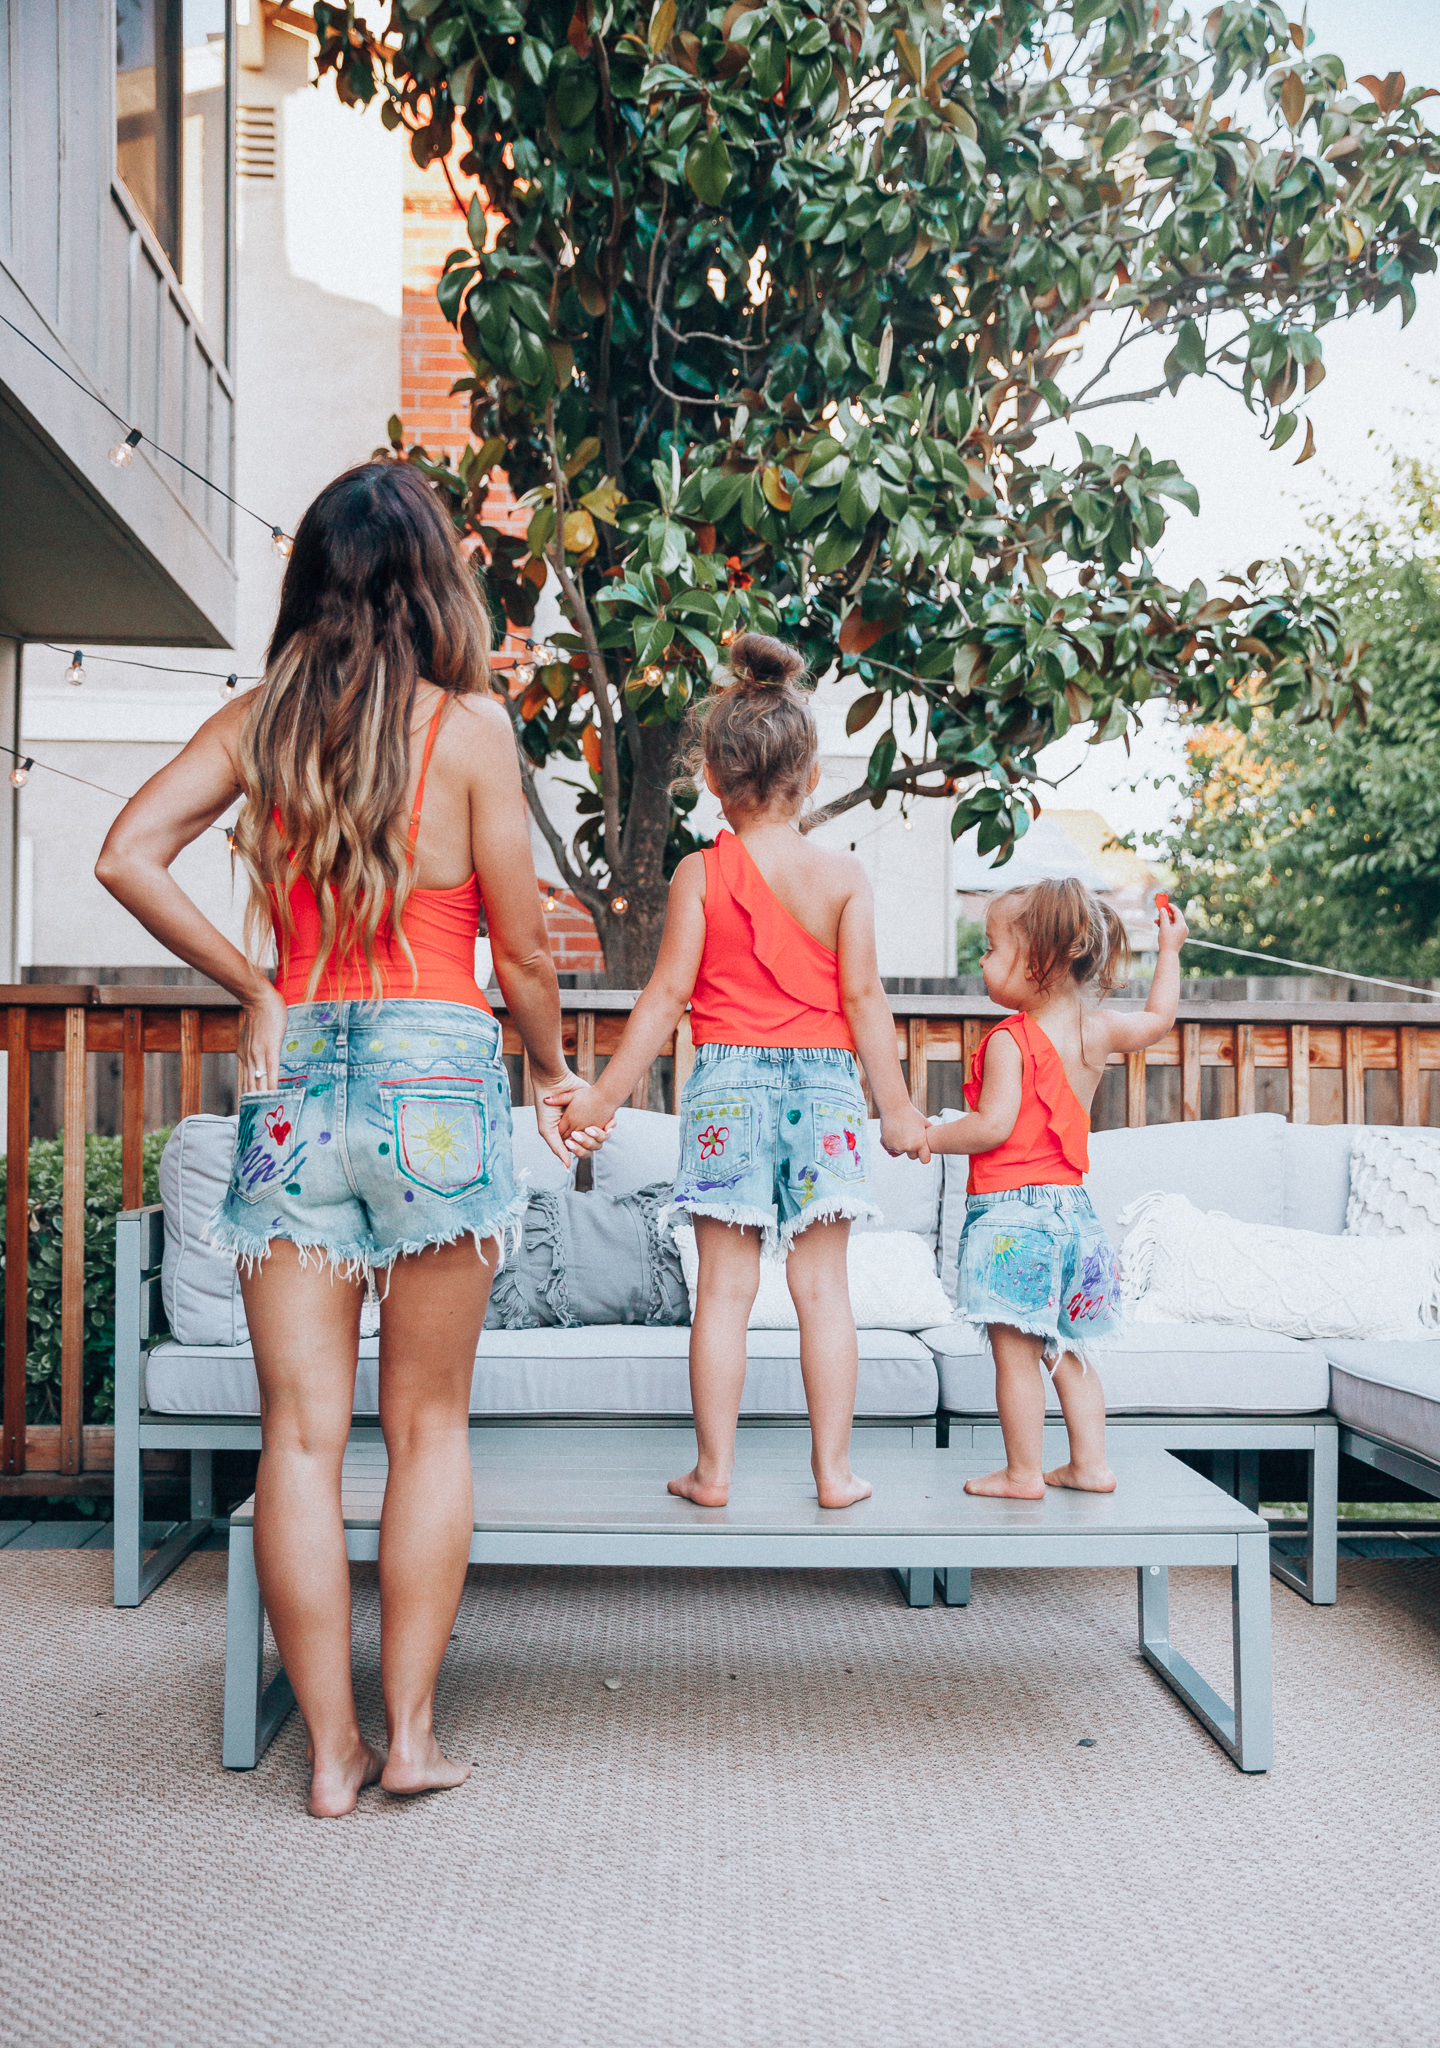 The Girl in the Yellow Dress | Latisha Springer | Fun Summer Activities for Kids by top US mom blog, The Girl in the Yellow Dress: image of mom with young girls sitting on back porch deck wearing red swimsuits and cutoff denim shorts with decorative puff paint designs.